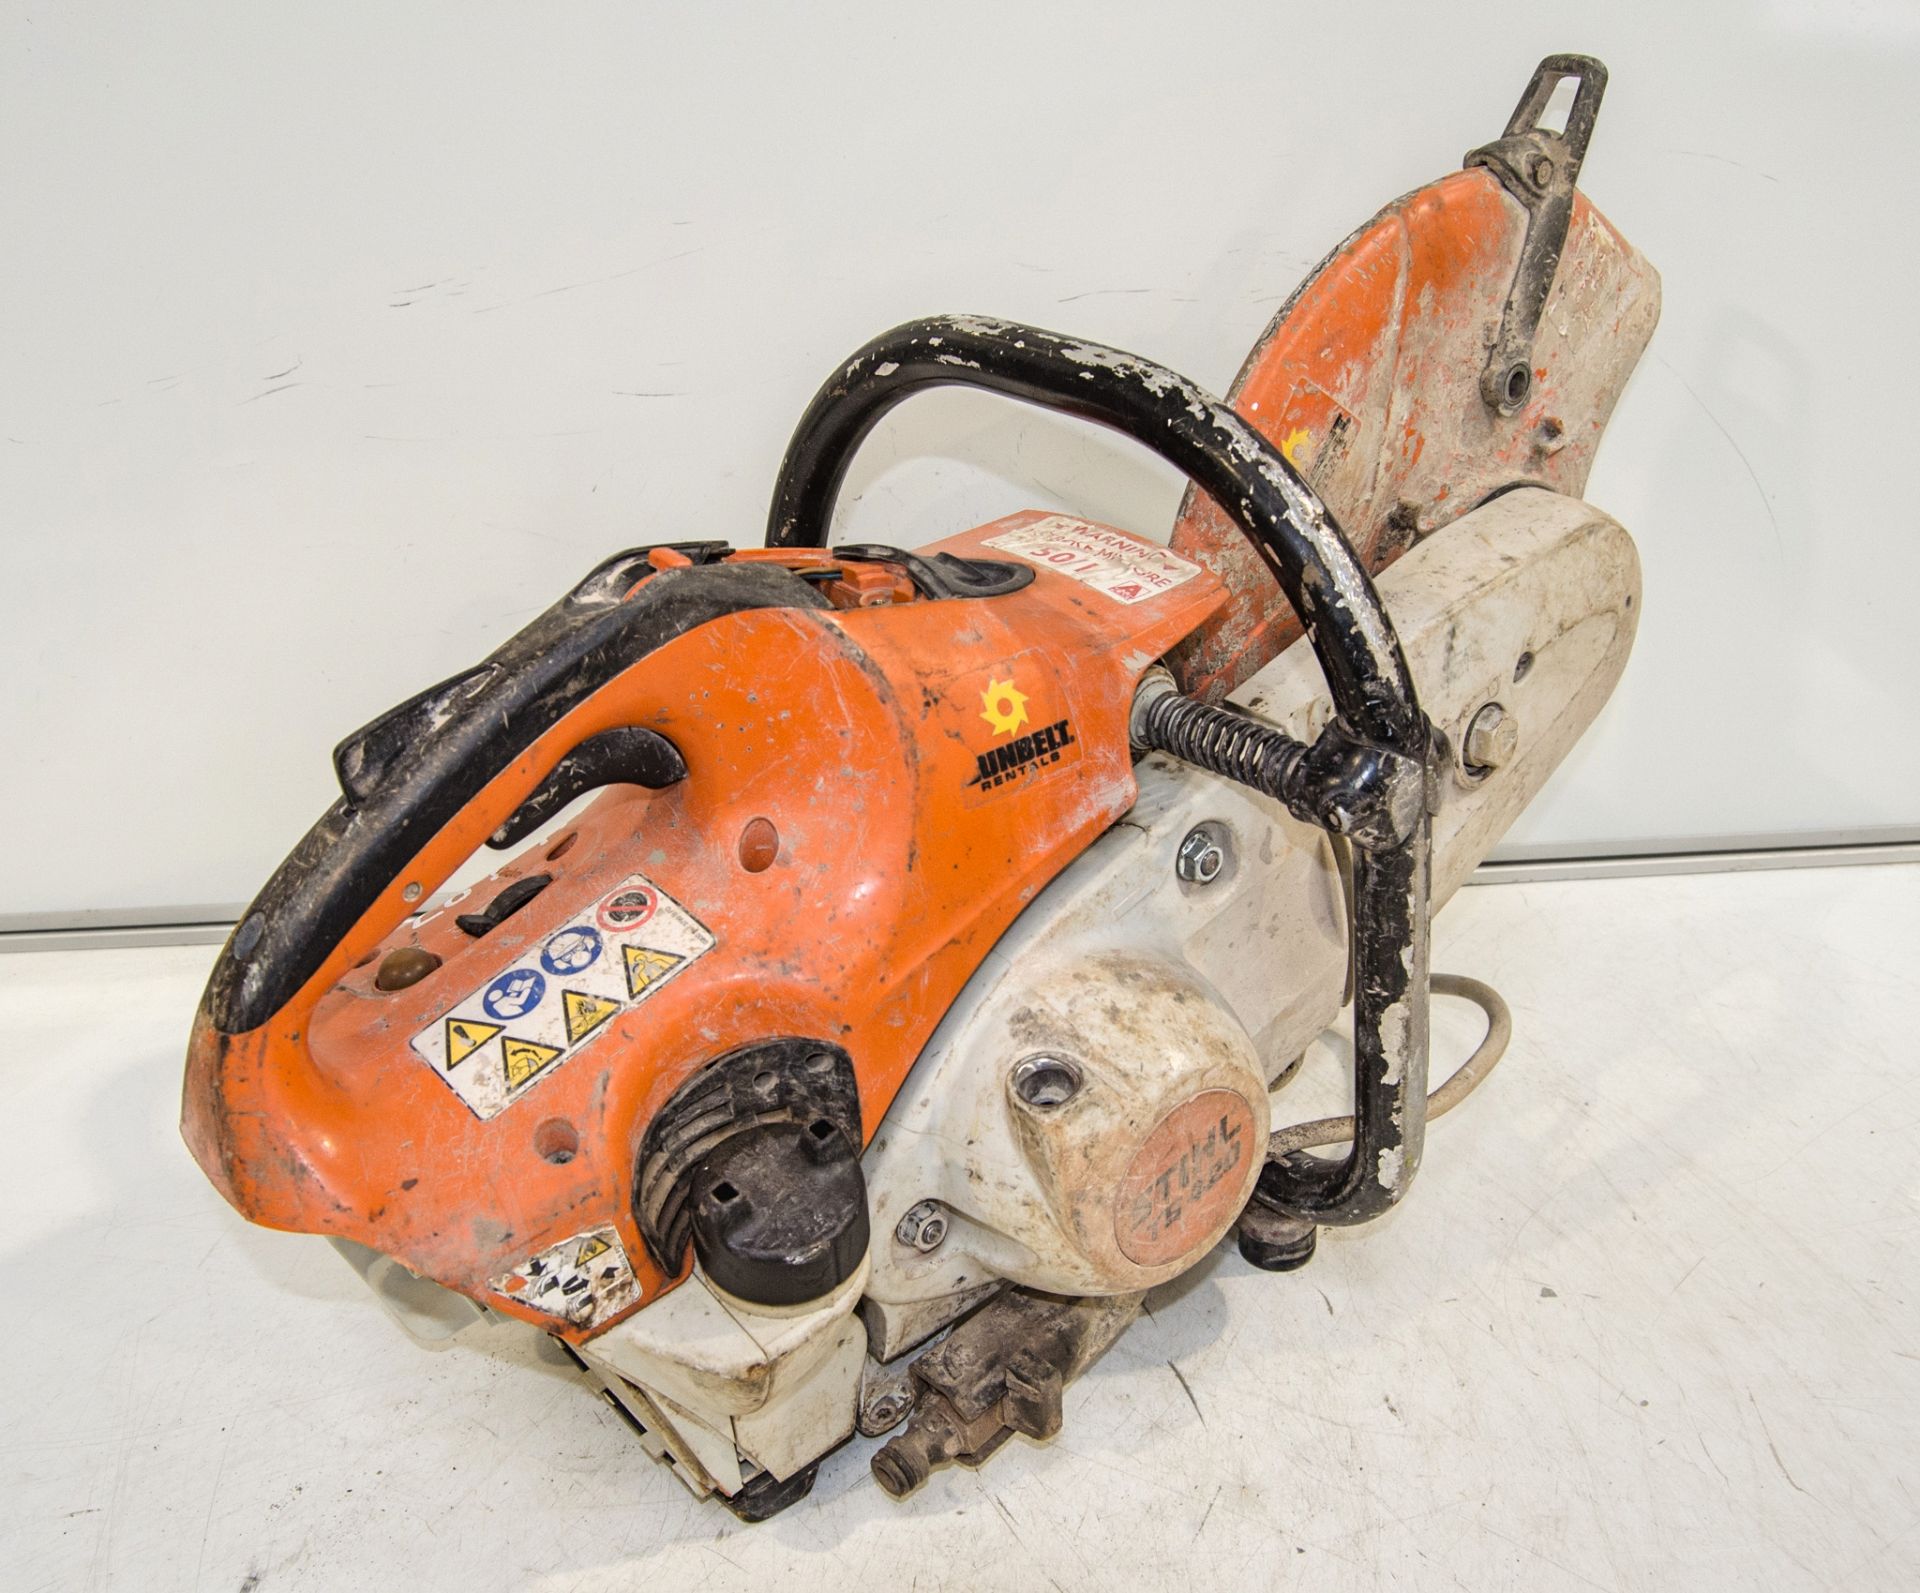 Stihl TS420 petrol driven cut off saw ** Pull cord and spark plug missing ** A985192 - Image 2 of 2